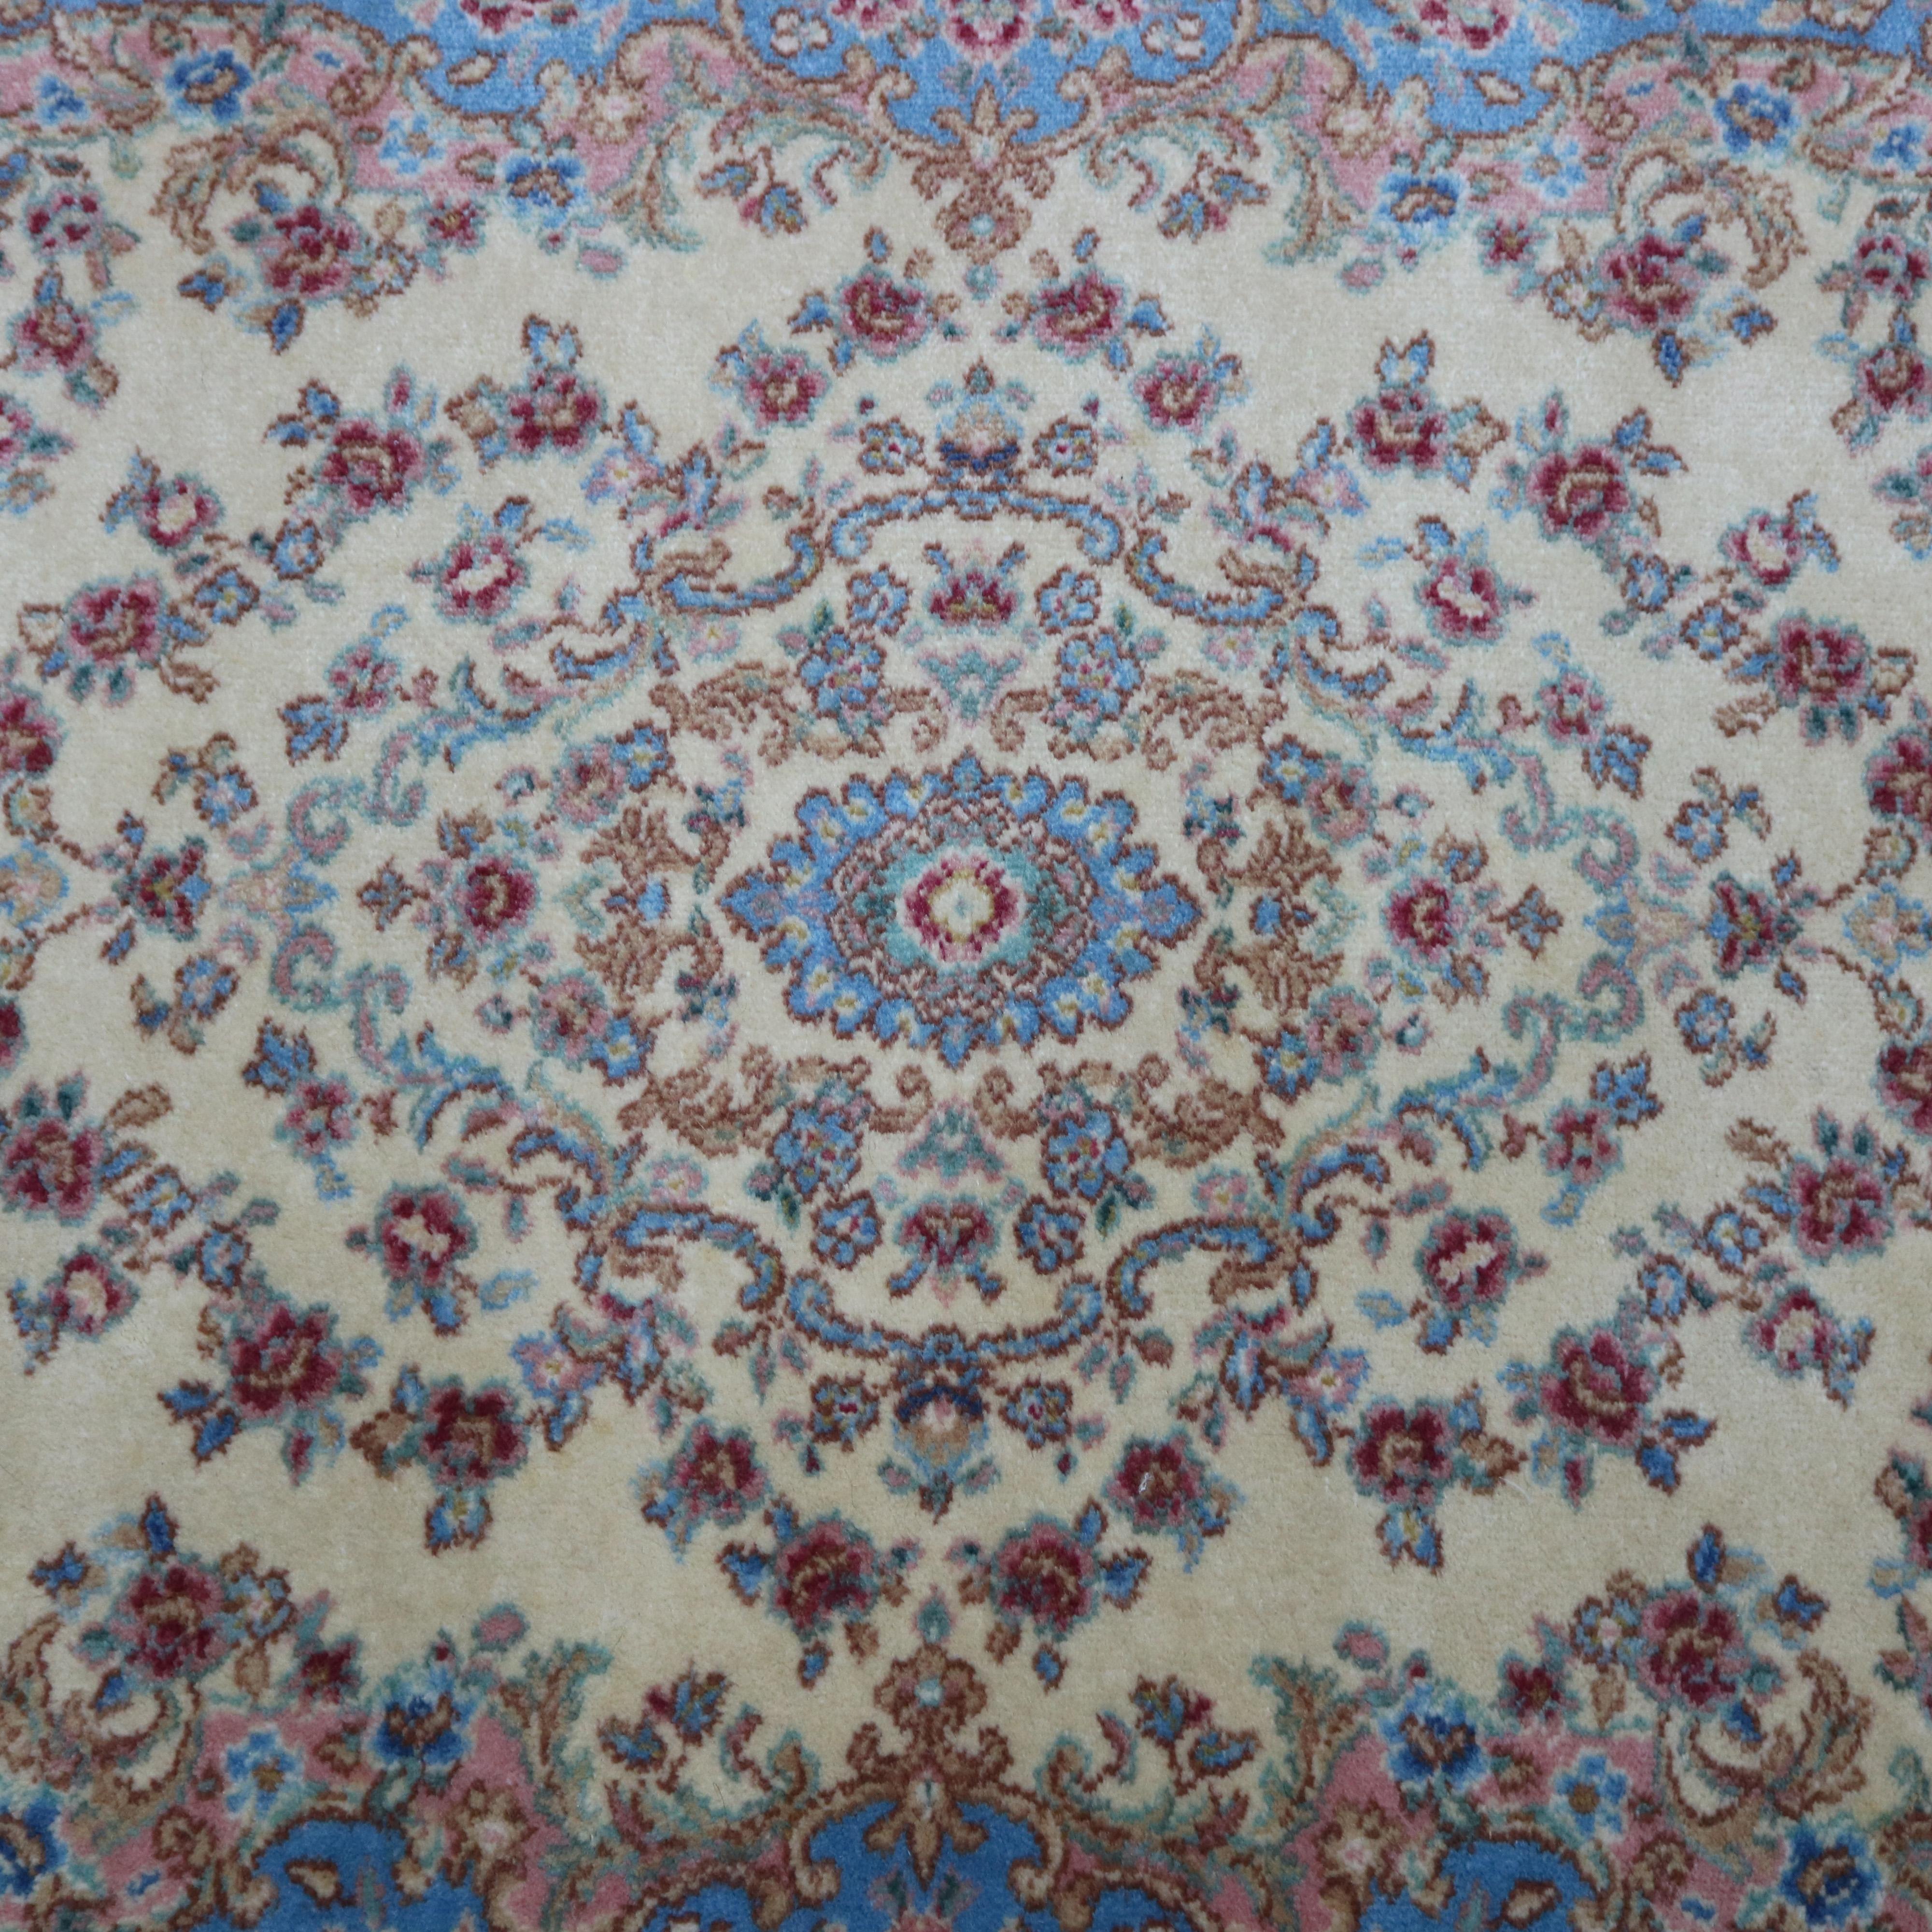 A vintage Kirman Oriental rug by Karastan offers wool on cotton construction with central floral medallion on ivory ground with blue spandrels, pattern Ivory Medallion #711, en verso original label as photographed, circa 1950.

Measures: 79.5